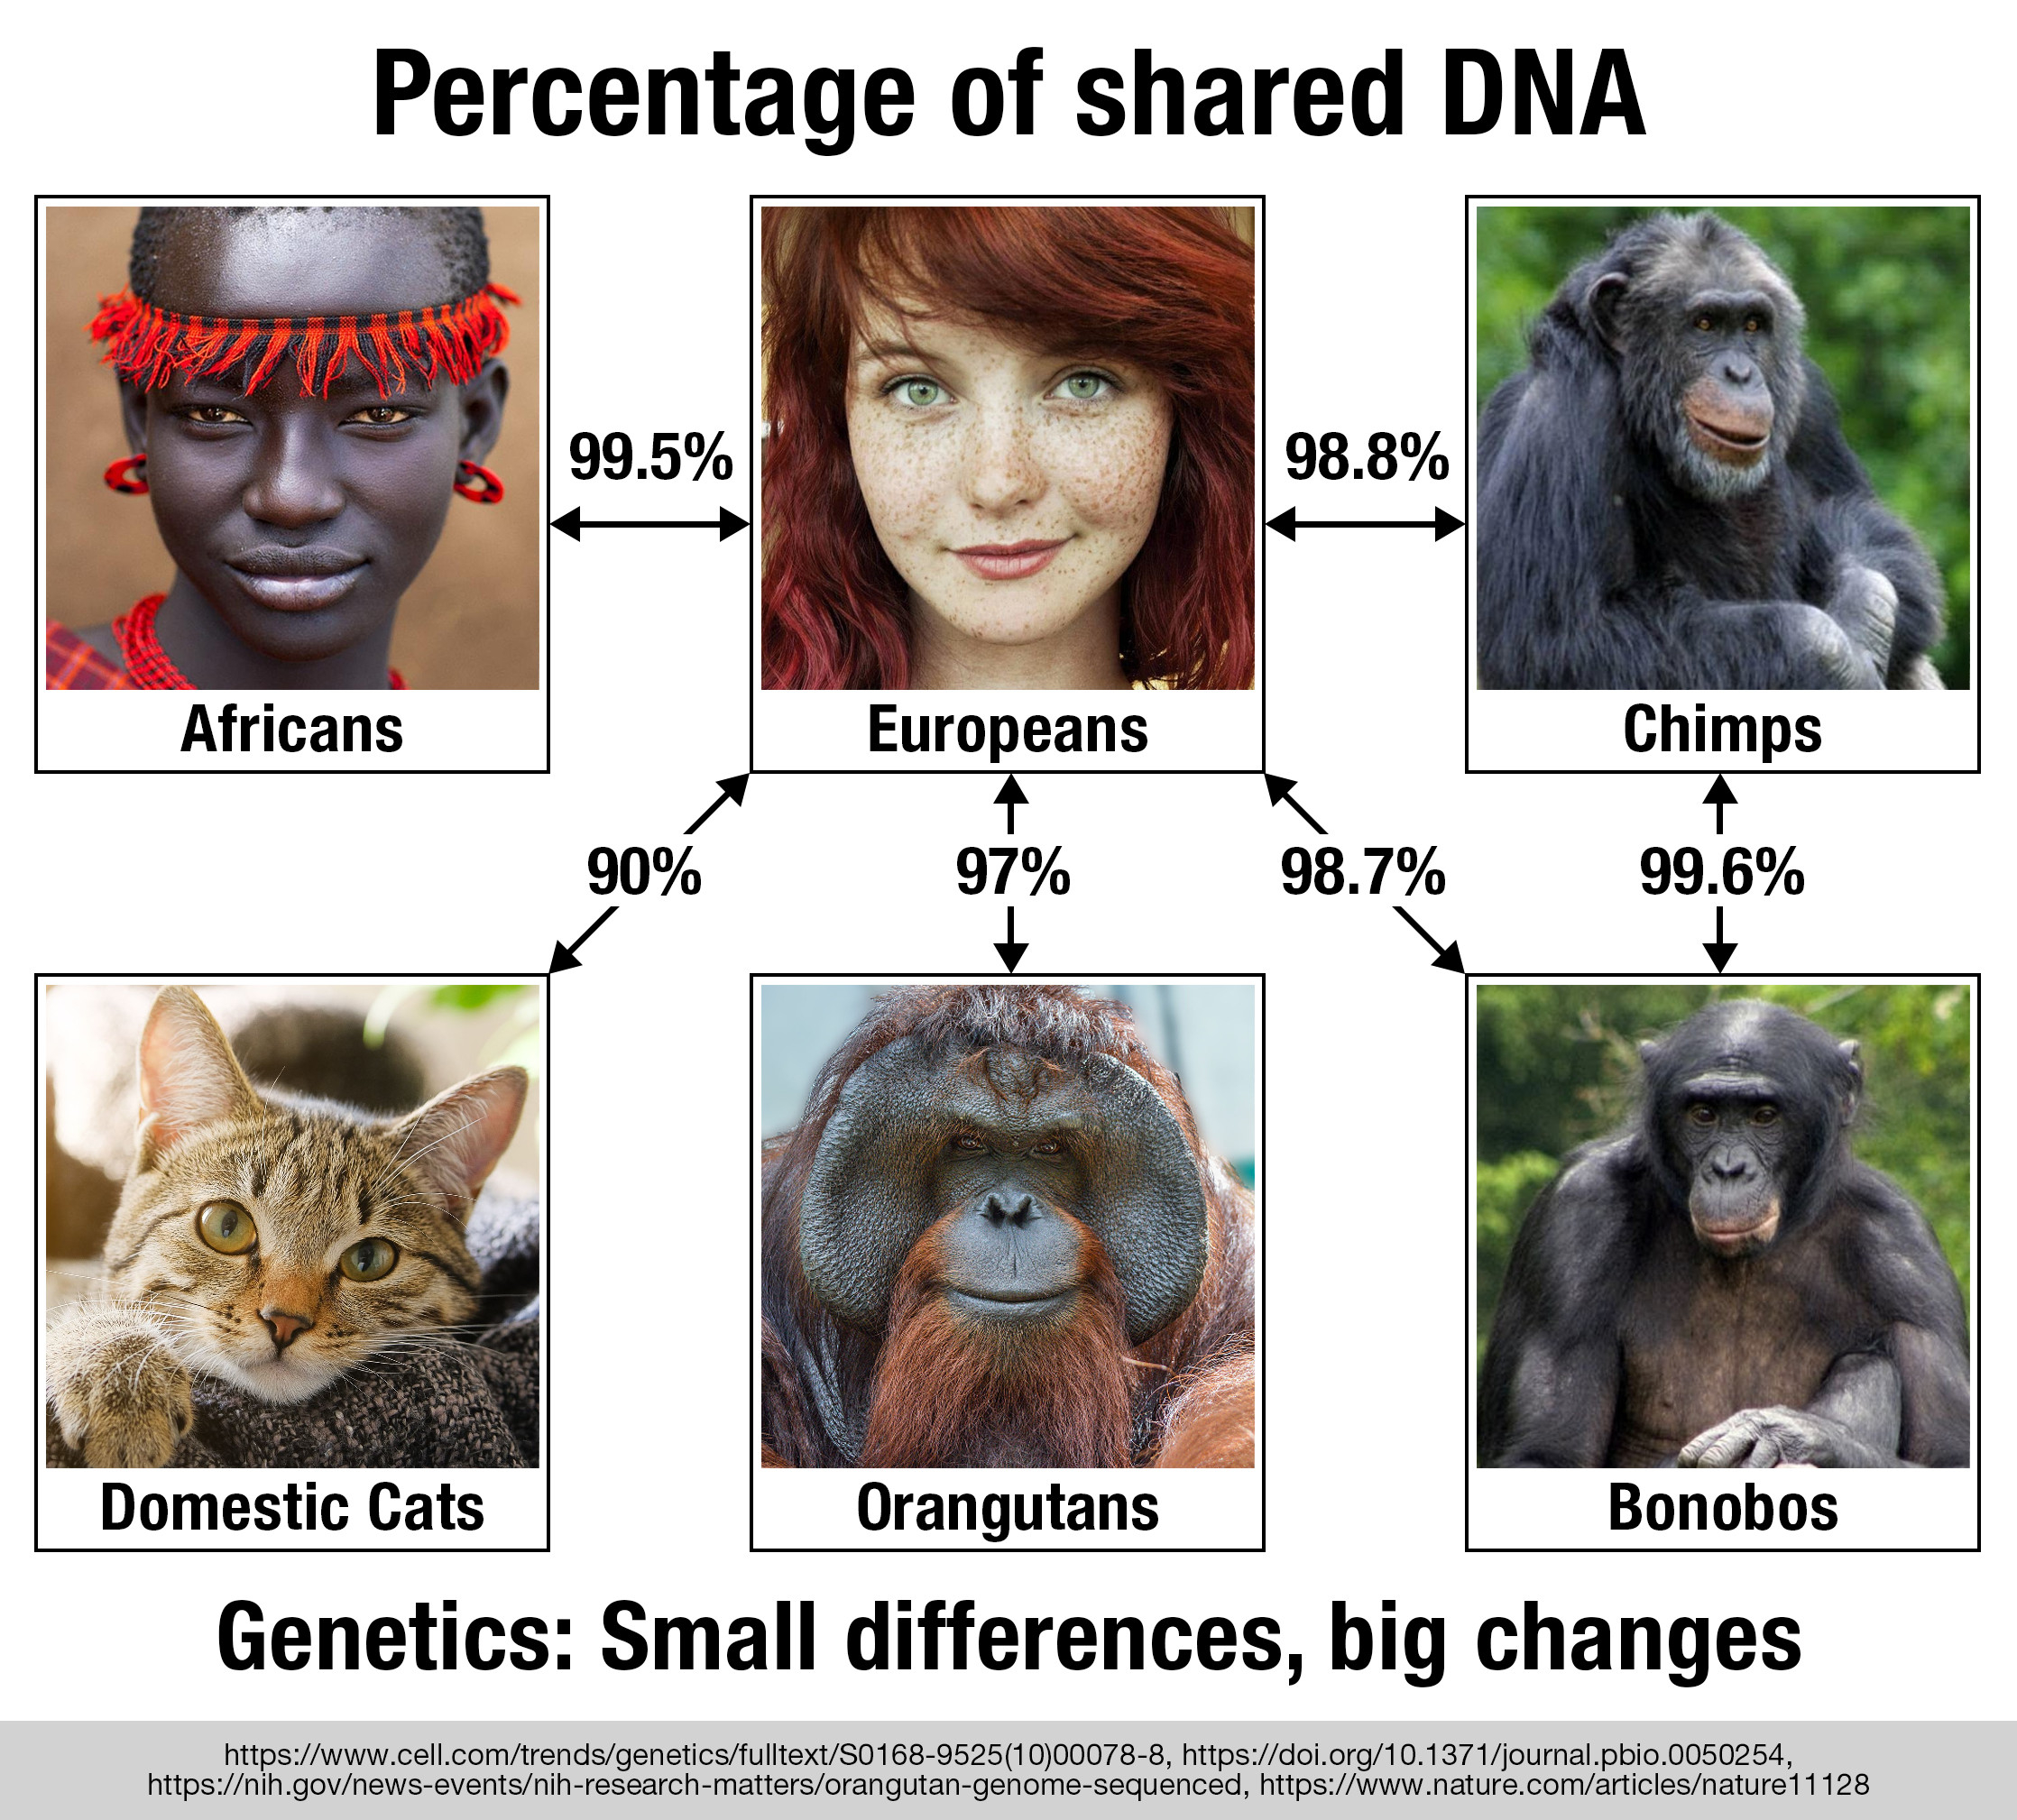 Genetics-Small-differences-big-changes-percentage-of-shared-DNA-humans-chimps-bonobos-cats-ora...jpg